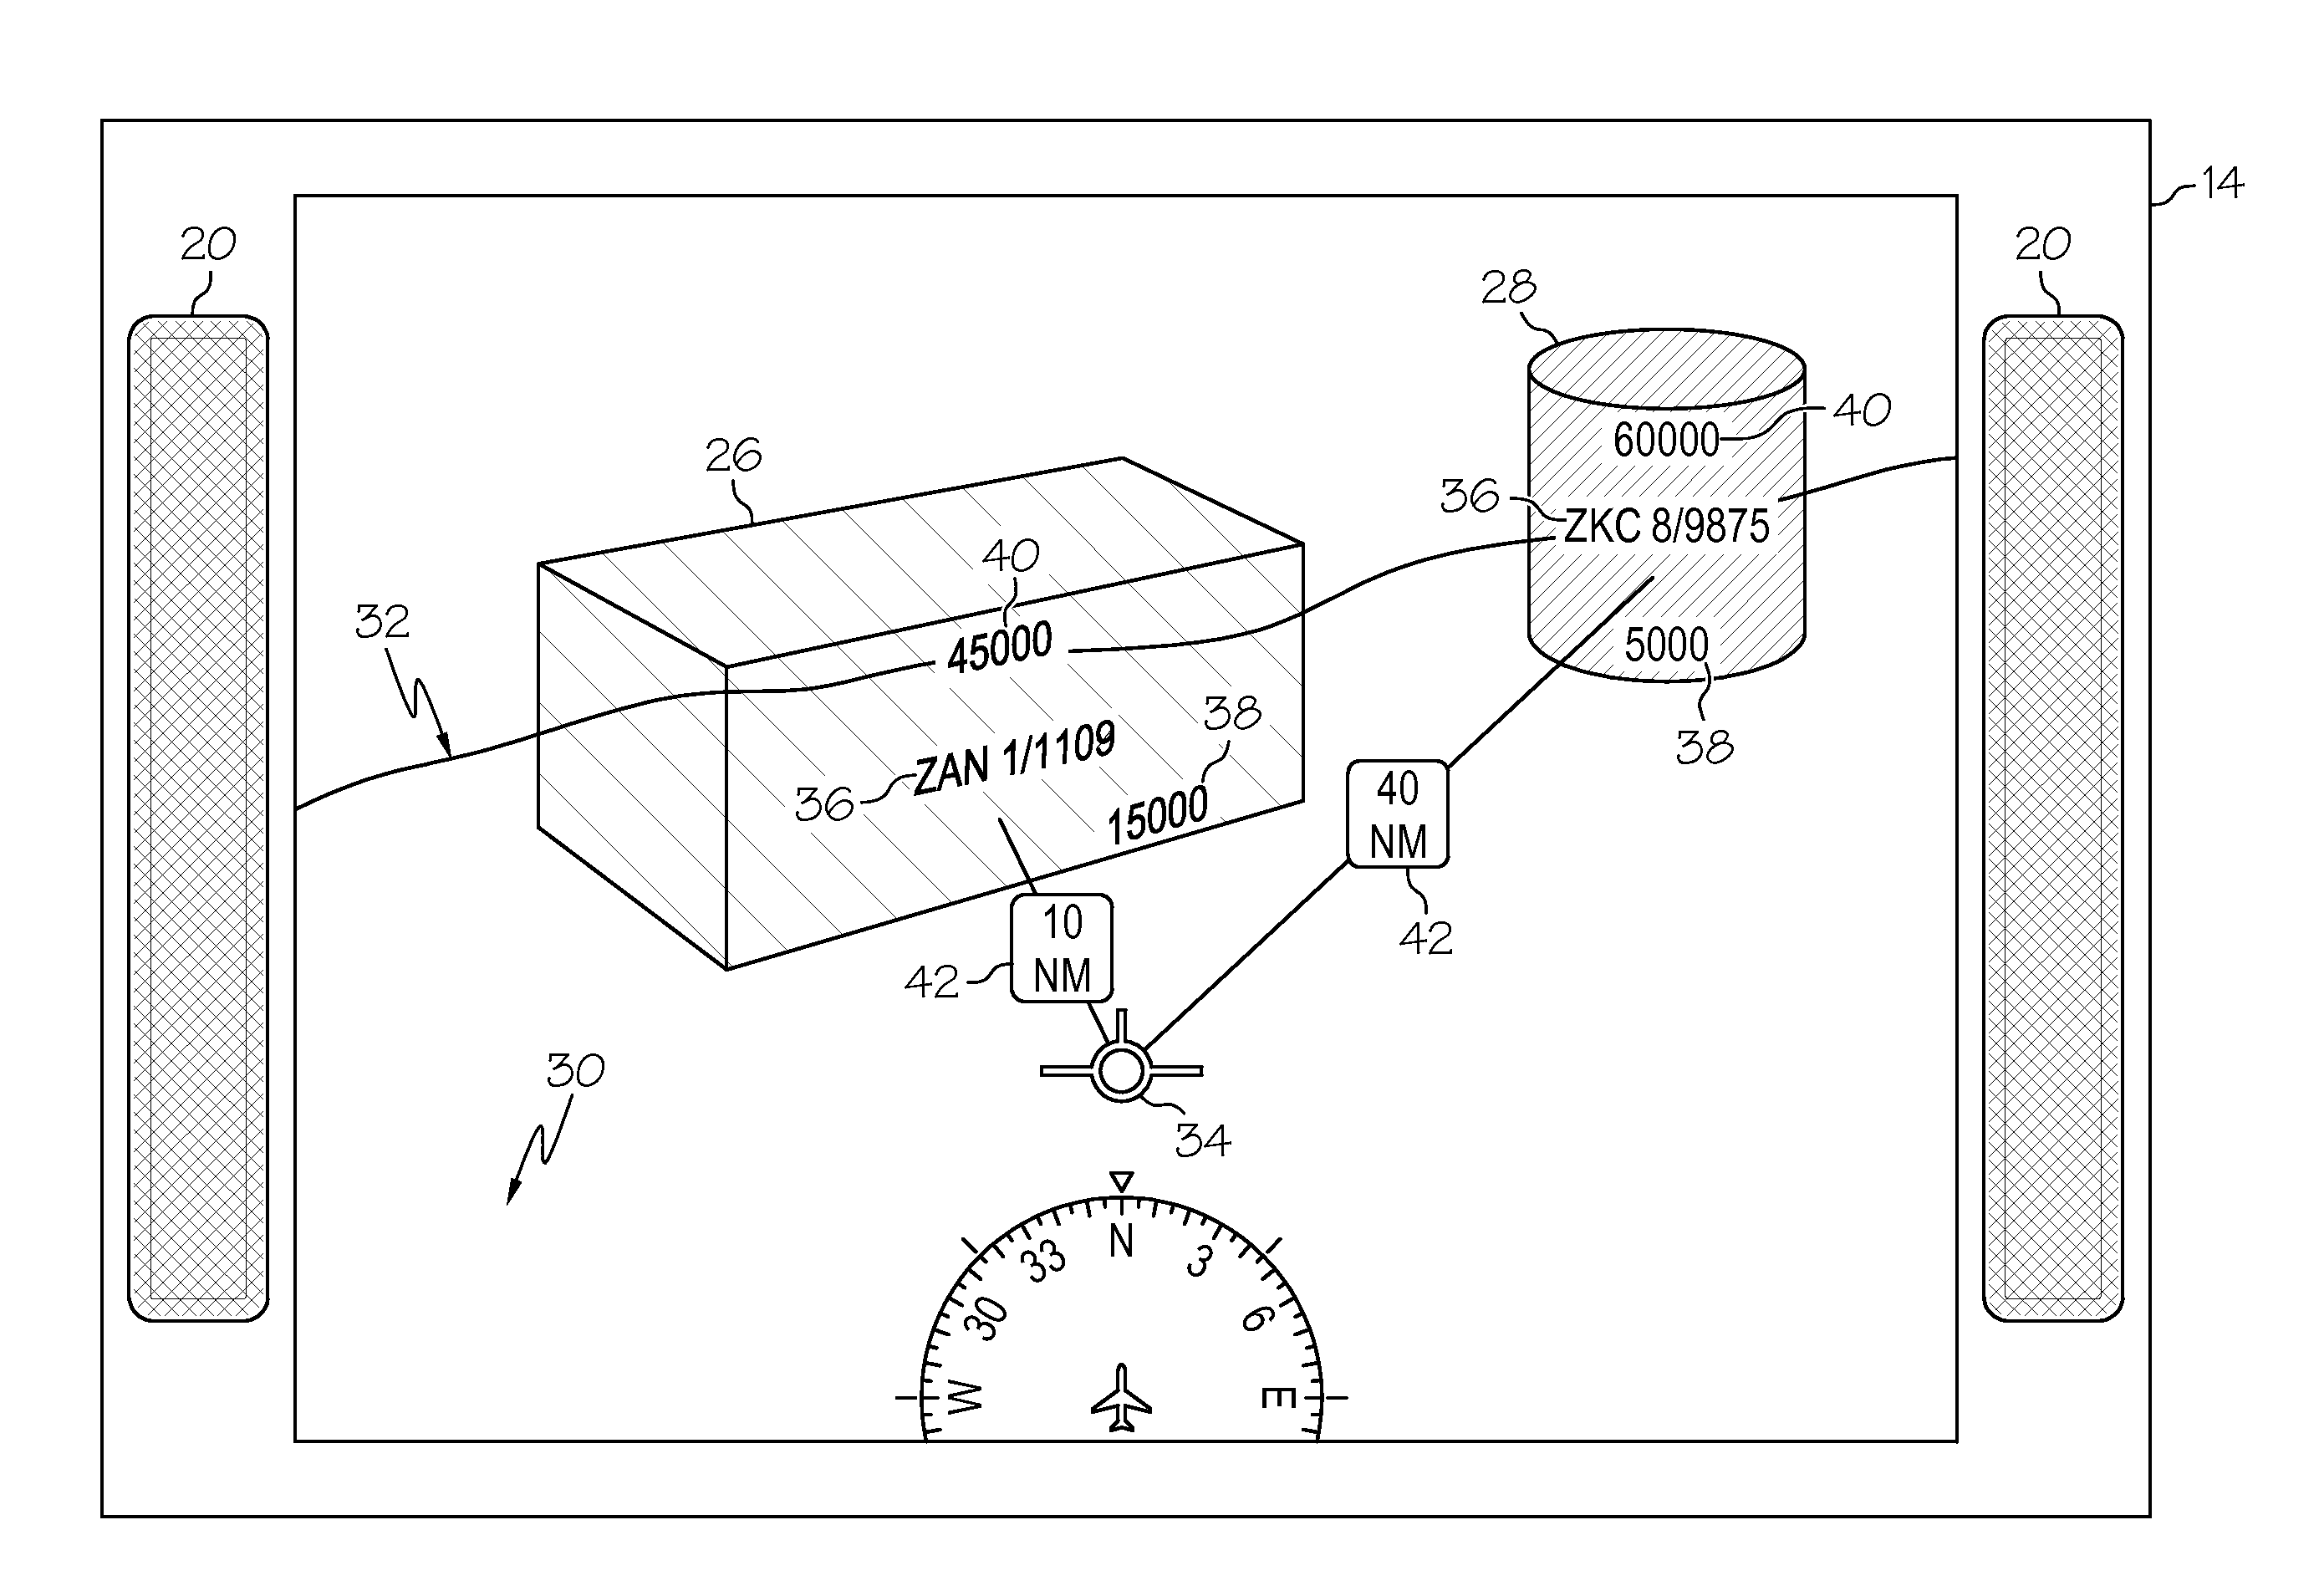 System and method for informing an aircraft operator about a temporary flight restriction in perspective view